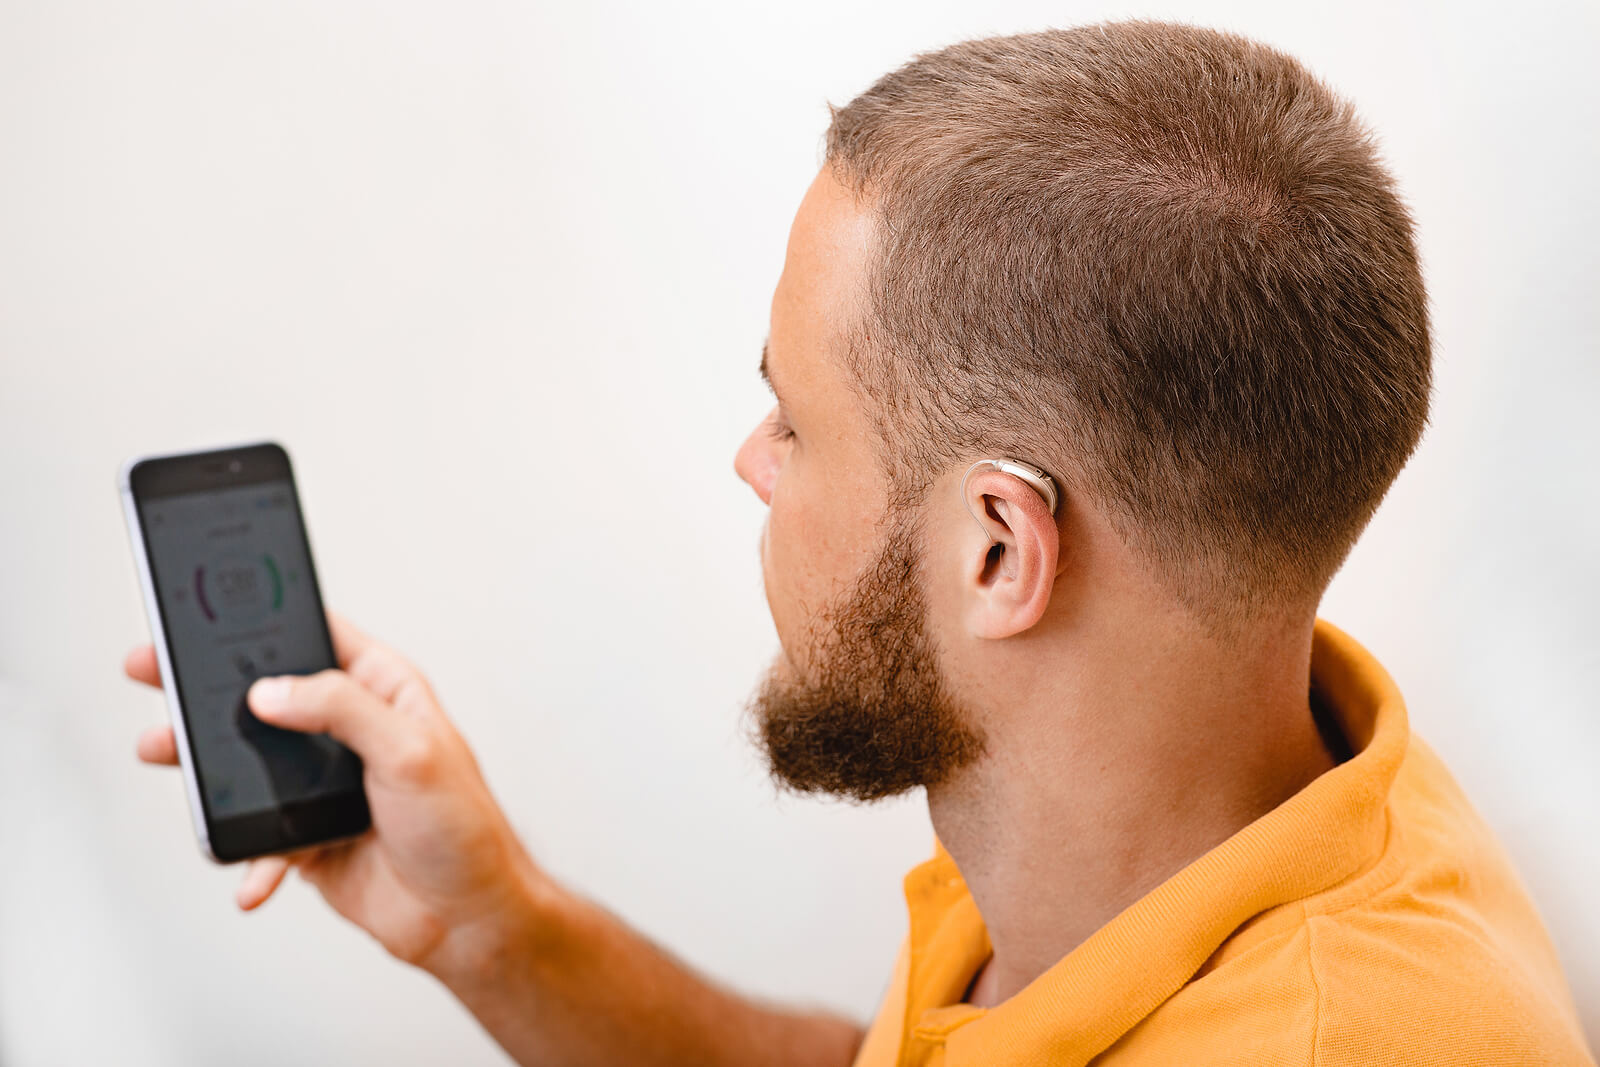 Man with hearing aid adjusting through cell phone app